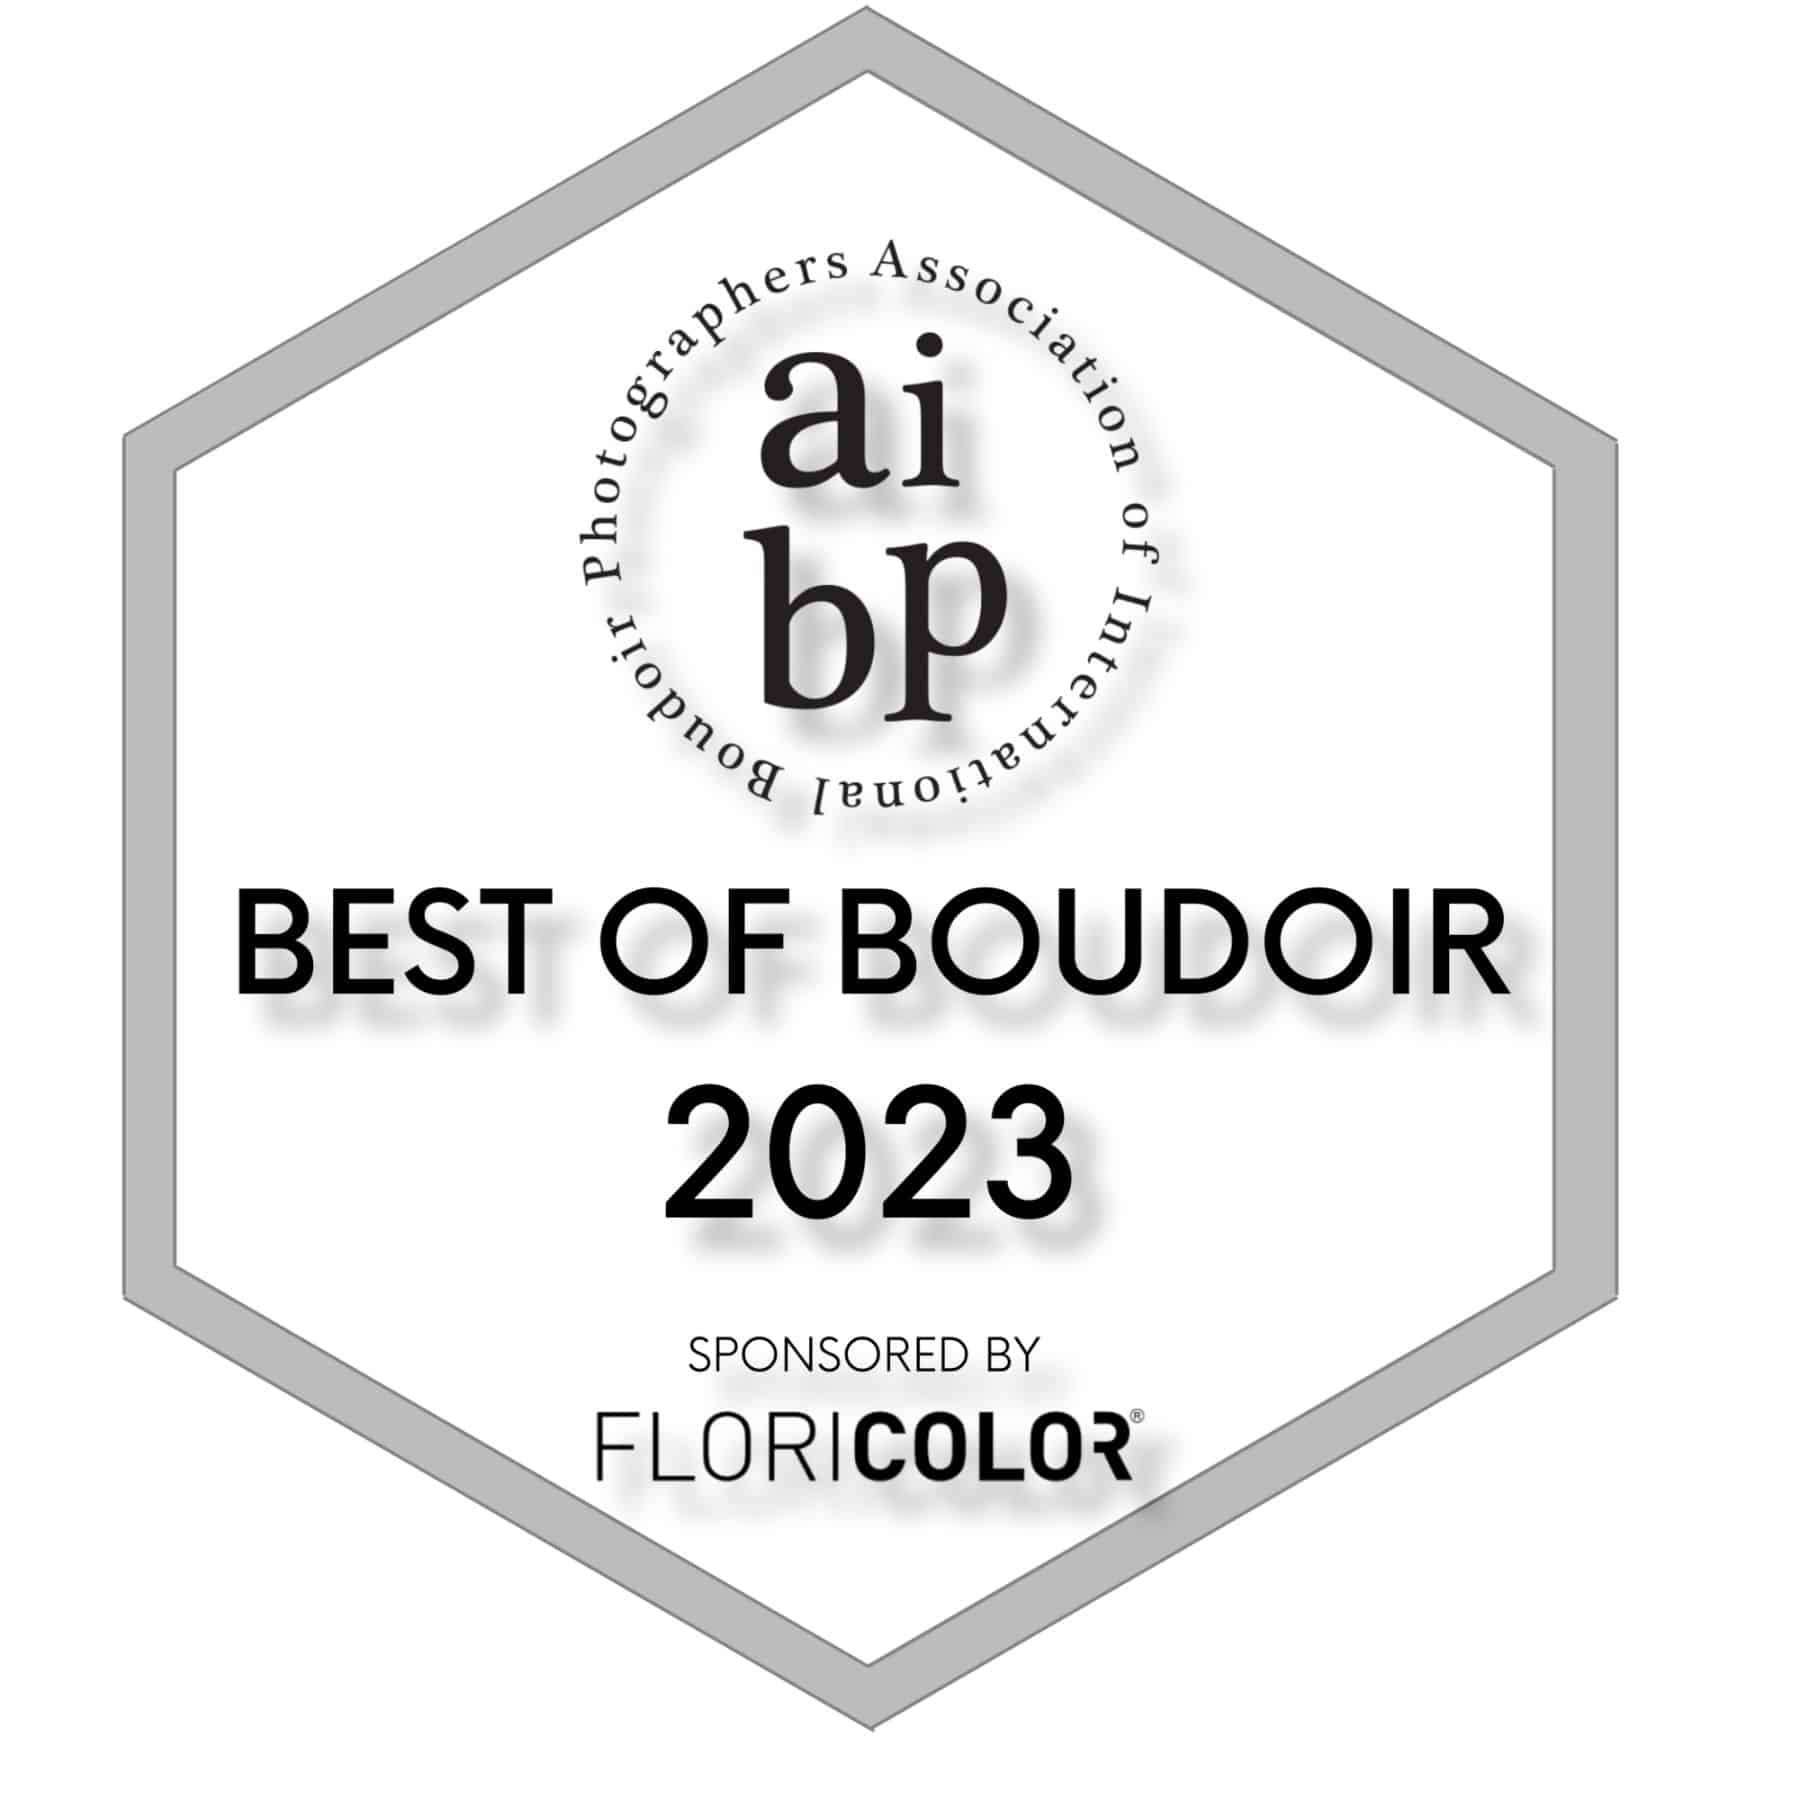 Shannon Hemauer won a Best of Boudoir 2023 from AIBP for her boudoir photo.